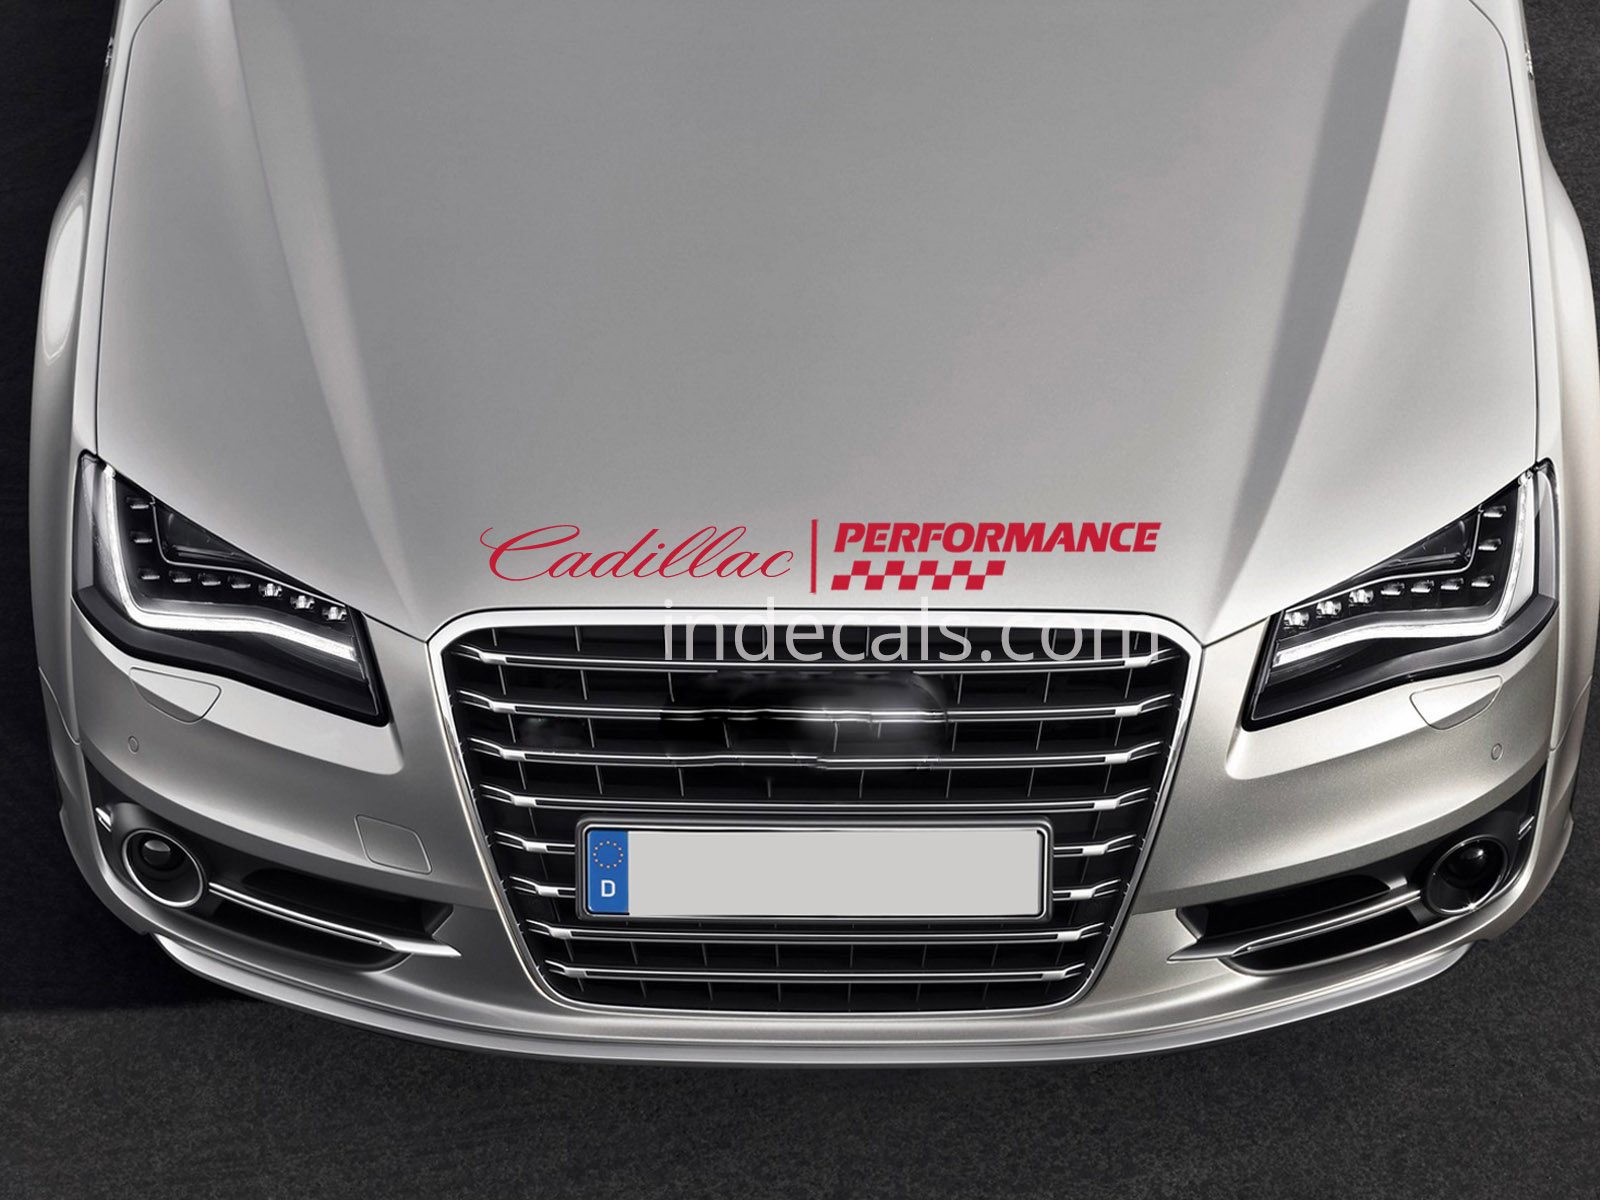 1 x Cadillac Performance Sticker for Bonnet - Red